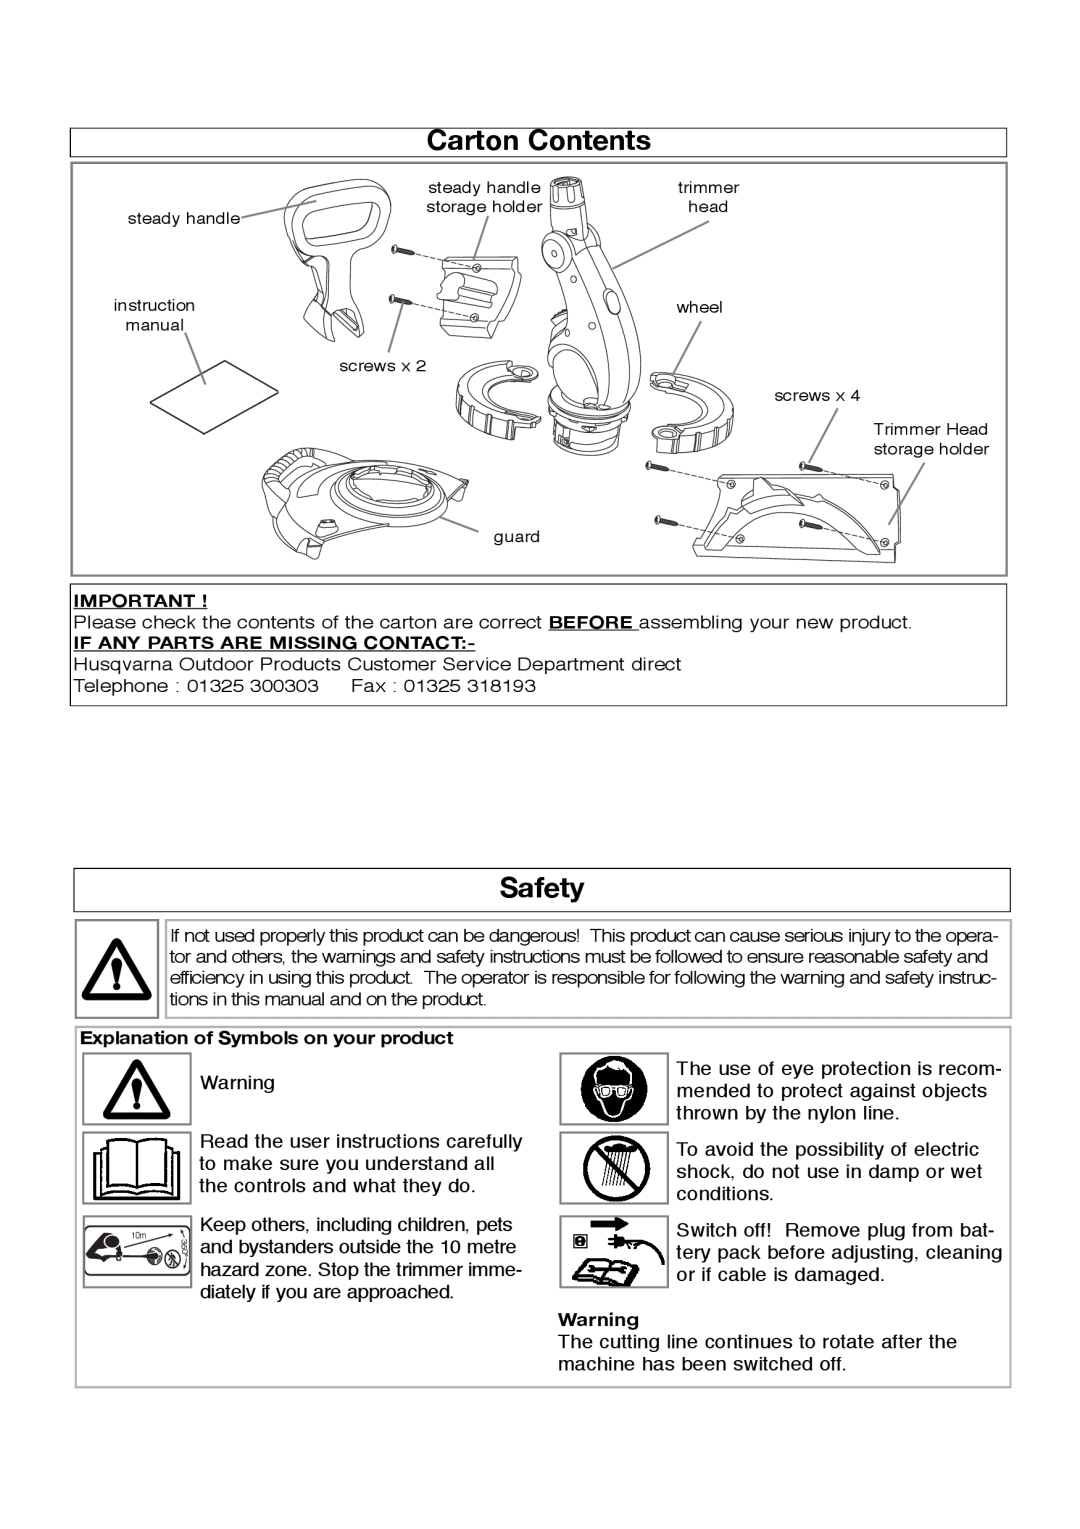 Flymo Sabre Trim manual Carton Contents, Safety, Explanation of Symbols on your product 